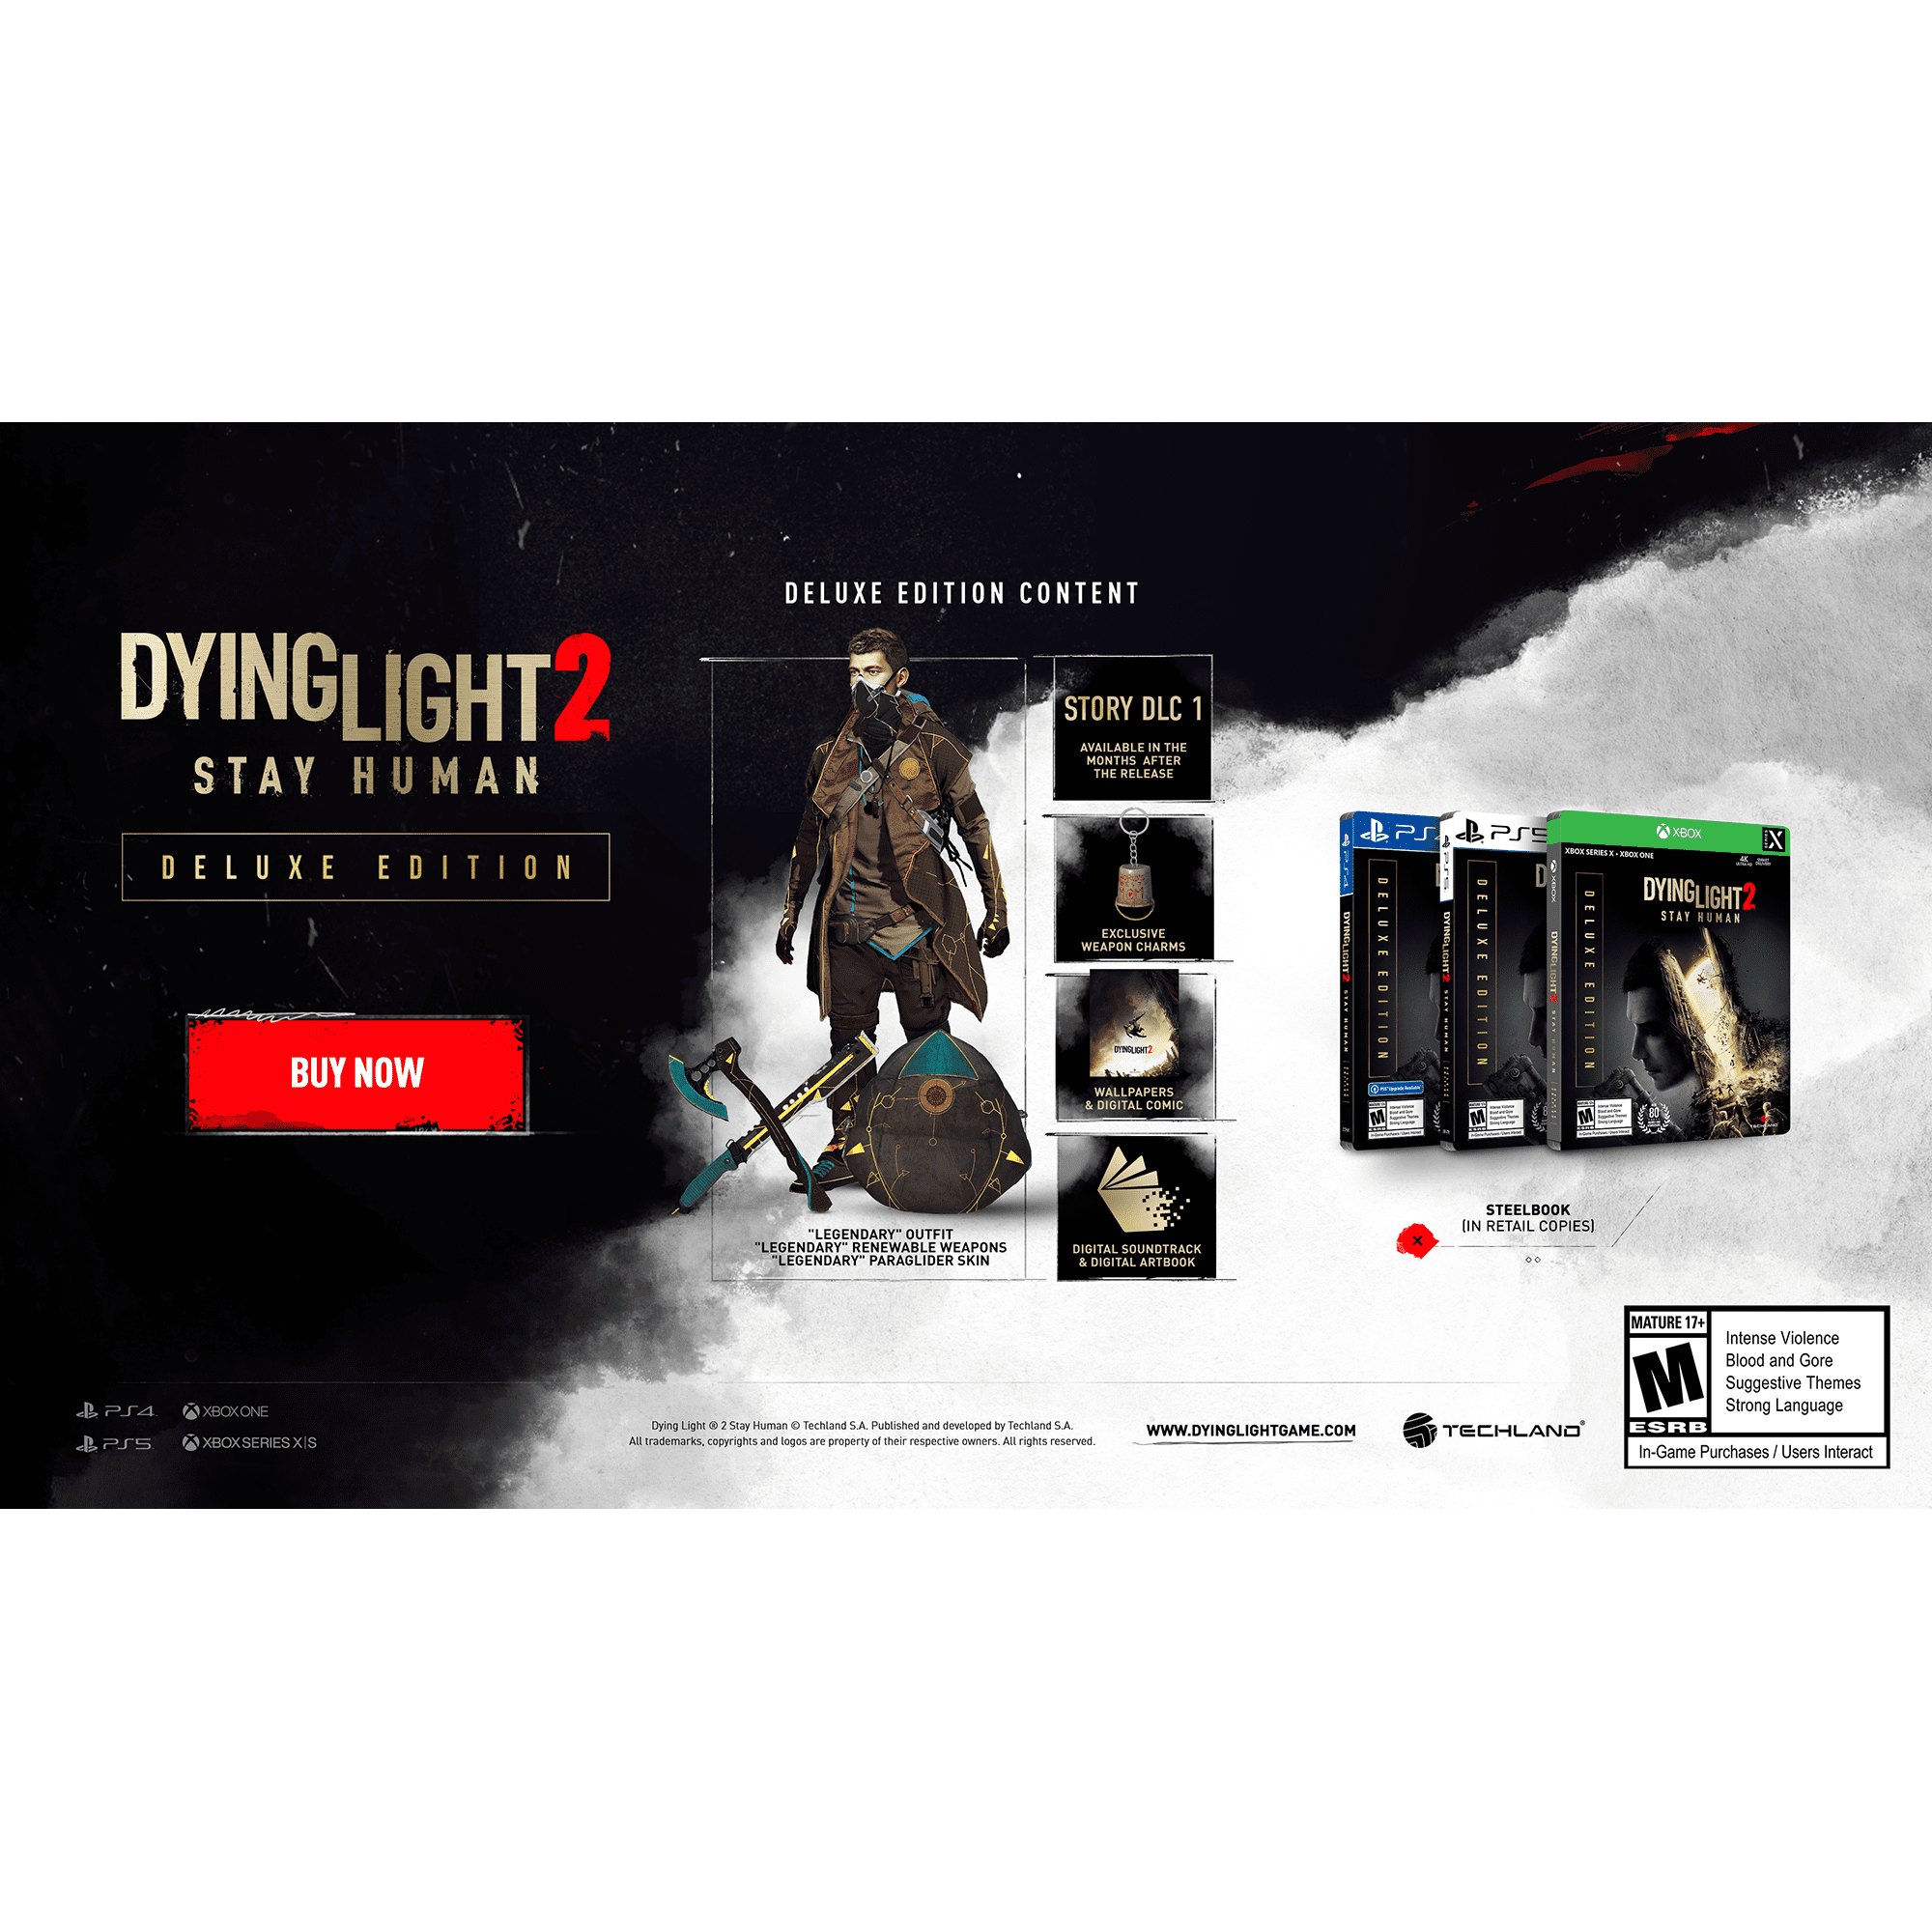 Nintendeal on X: 🚨 Need your help! What price do you see when you check  the Dying Light: Definitive Edition eShop listing   $9.99 or $7.49? Can't figure out why some see